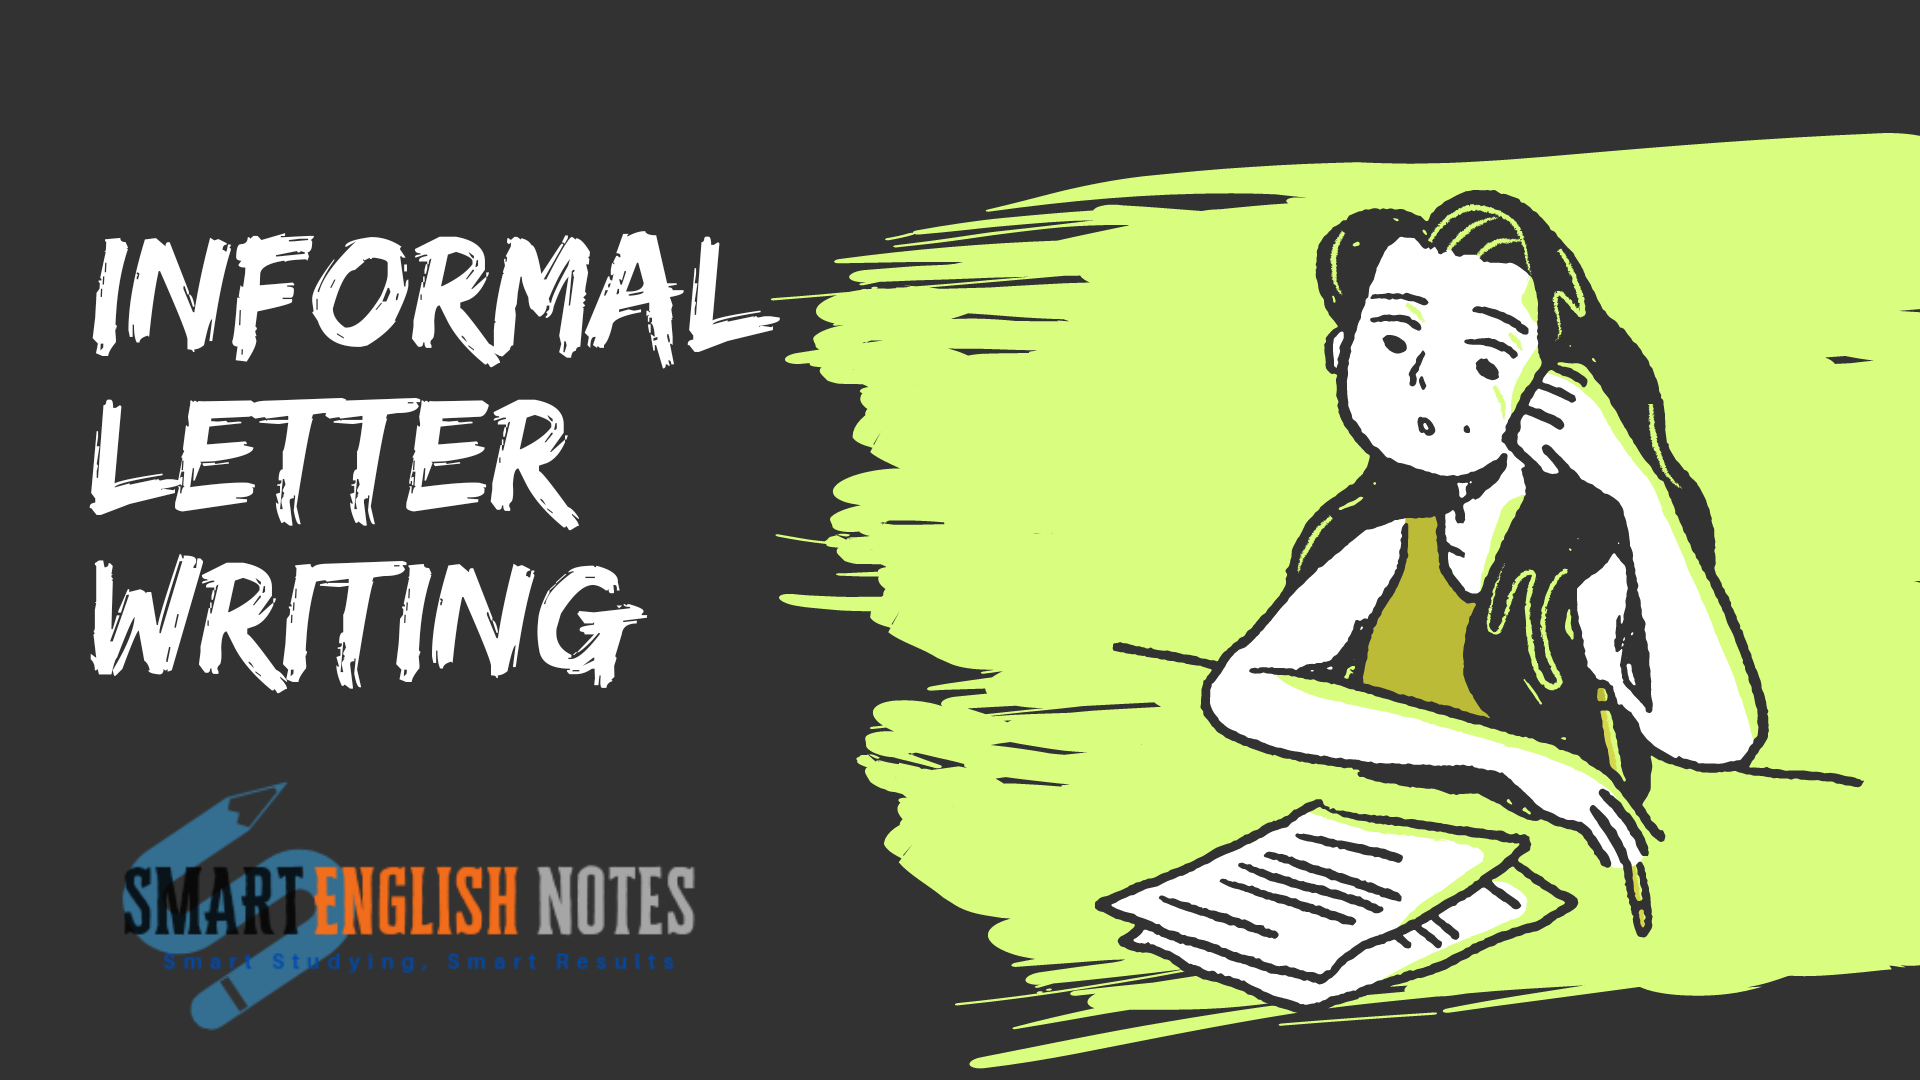 Informal Letter Writing- Types, Parts, Format and Samples of Informal Letters 2